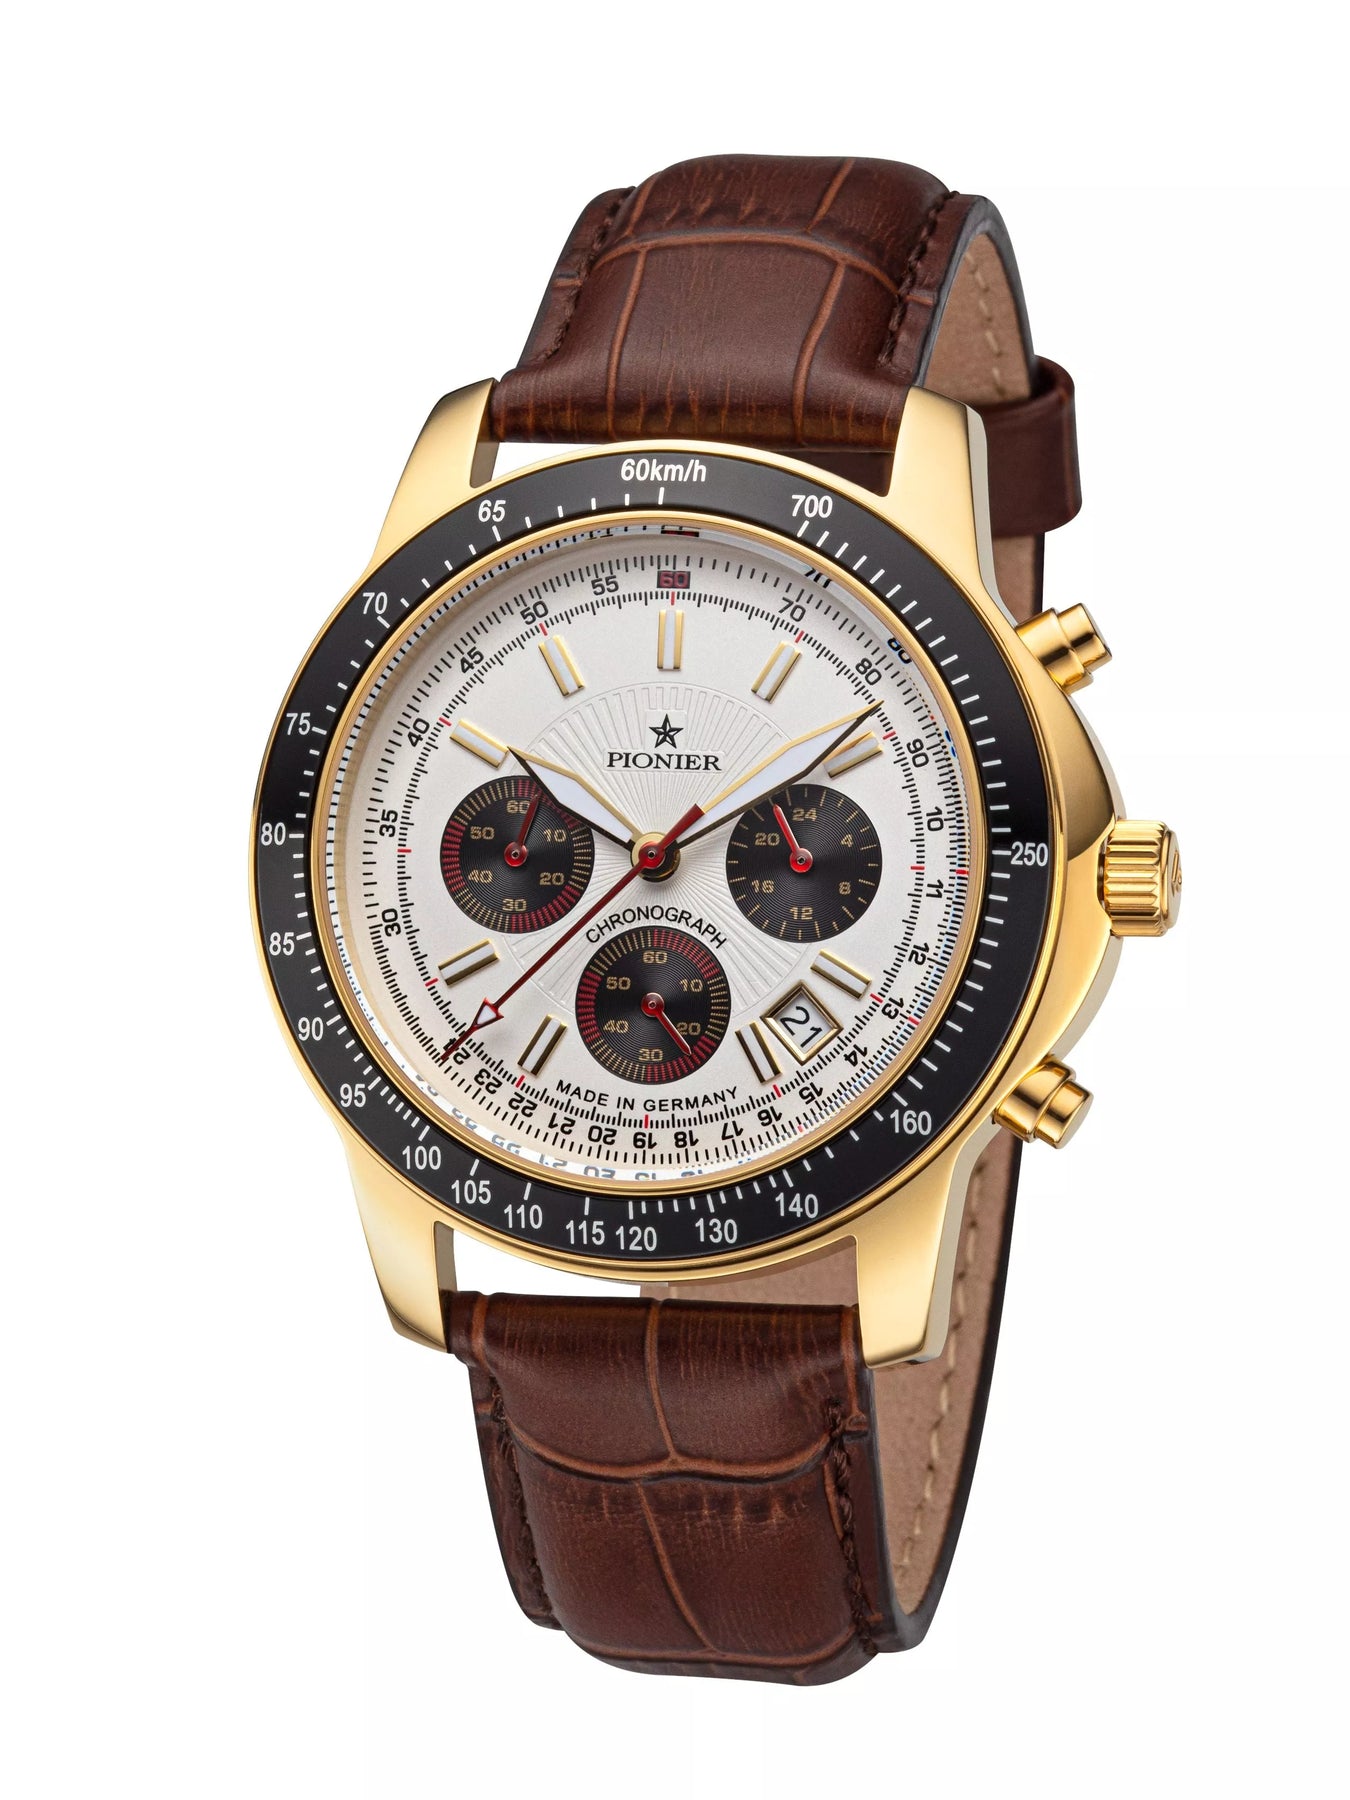 Made in Germany Chronograph with date function - Tirona Pionier - GM-550-4